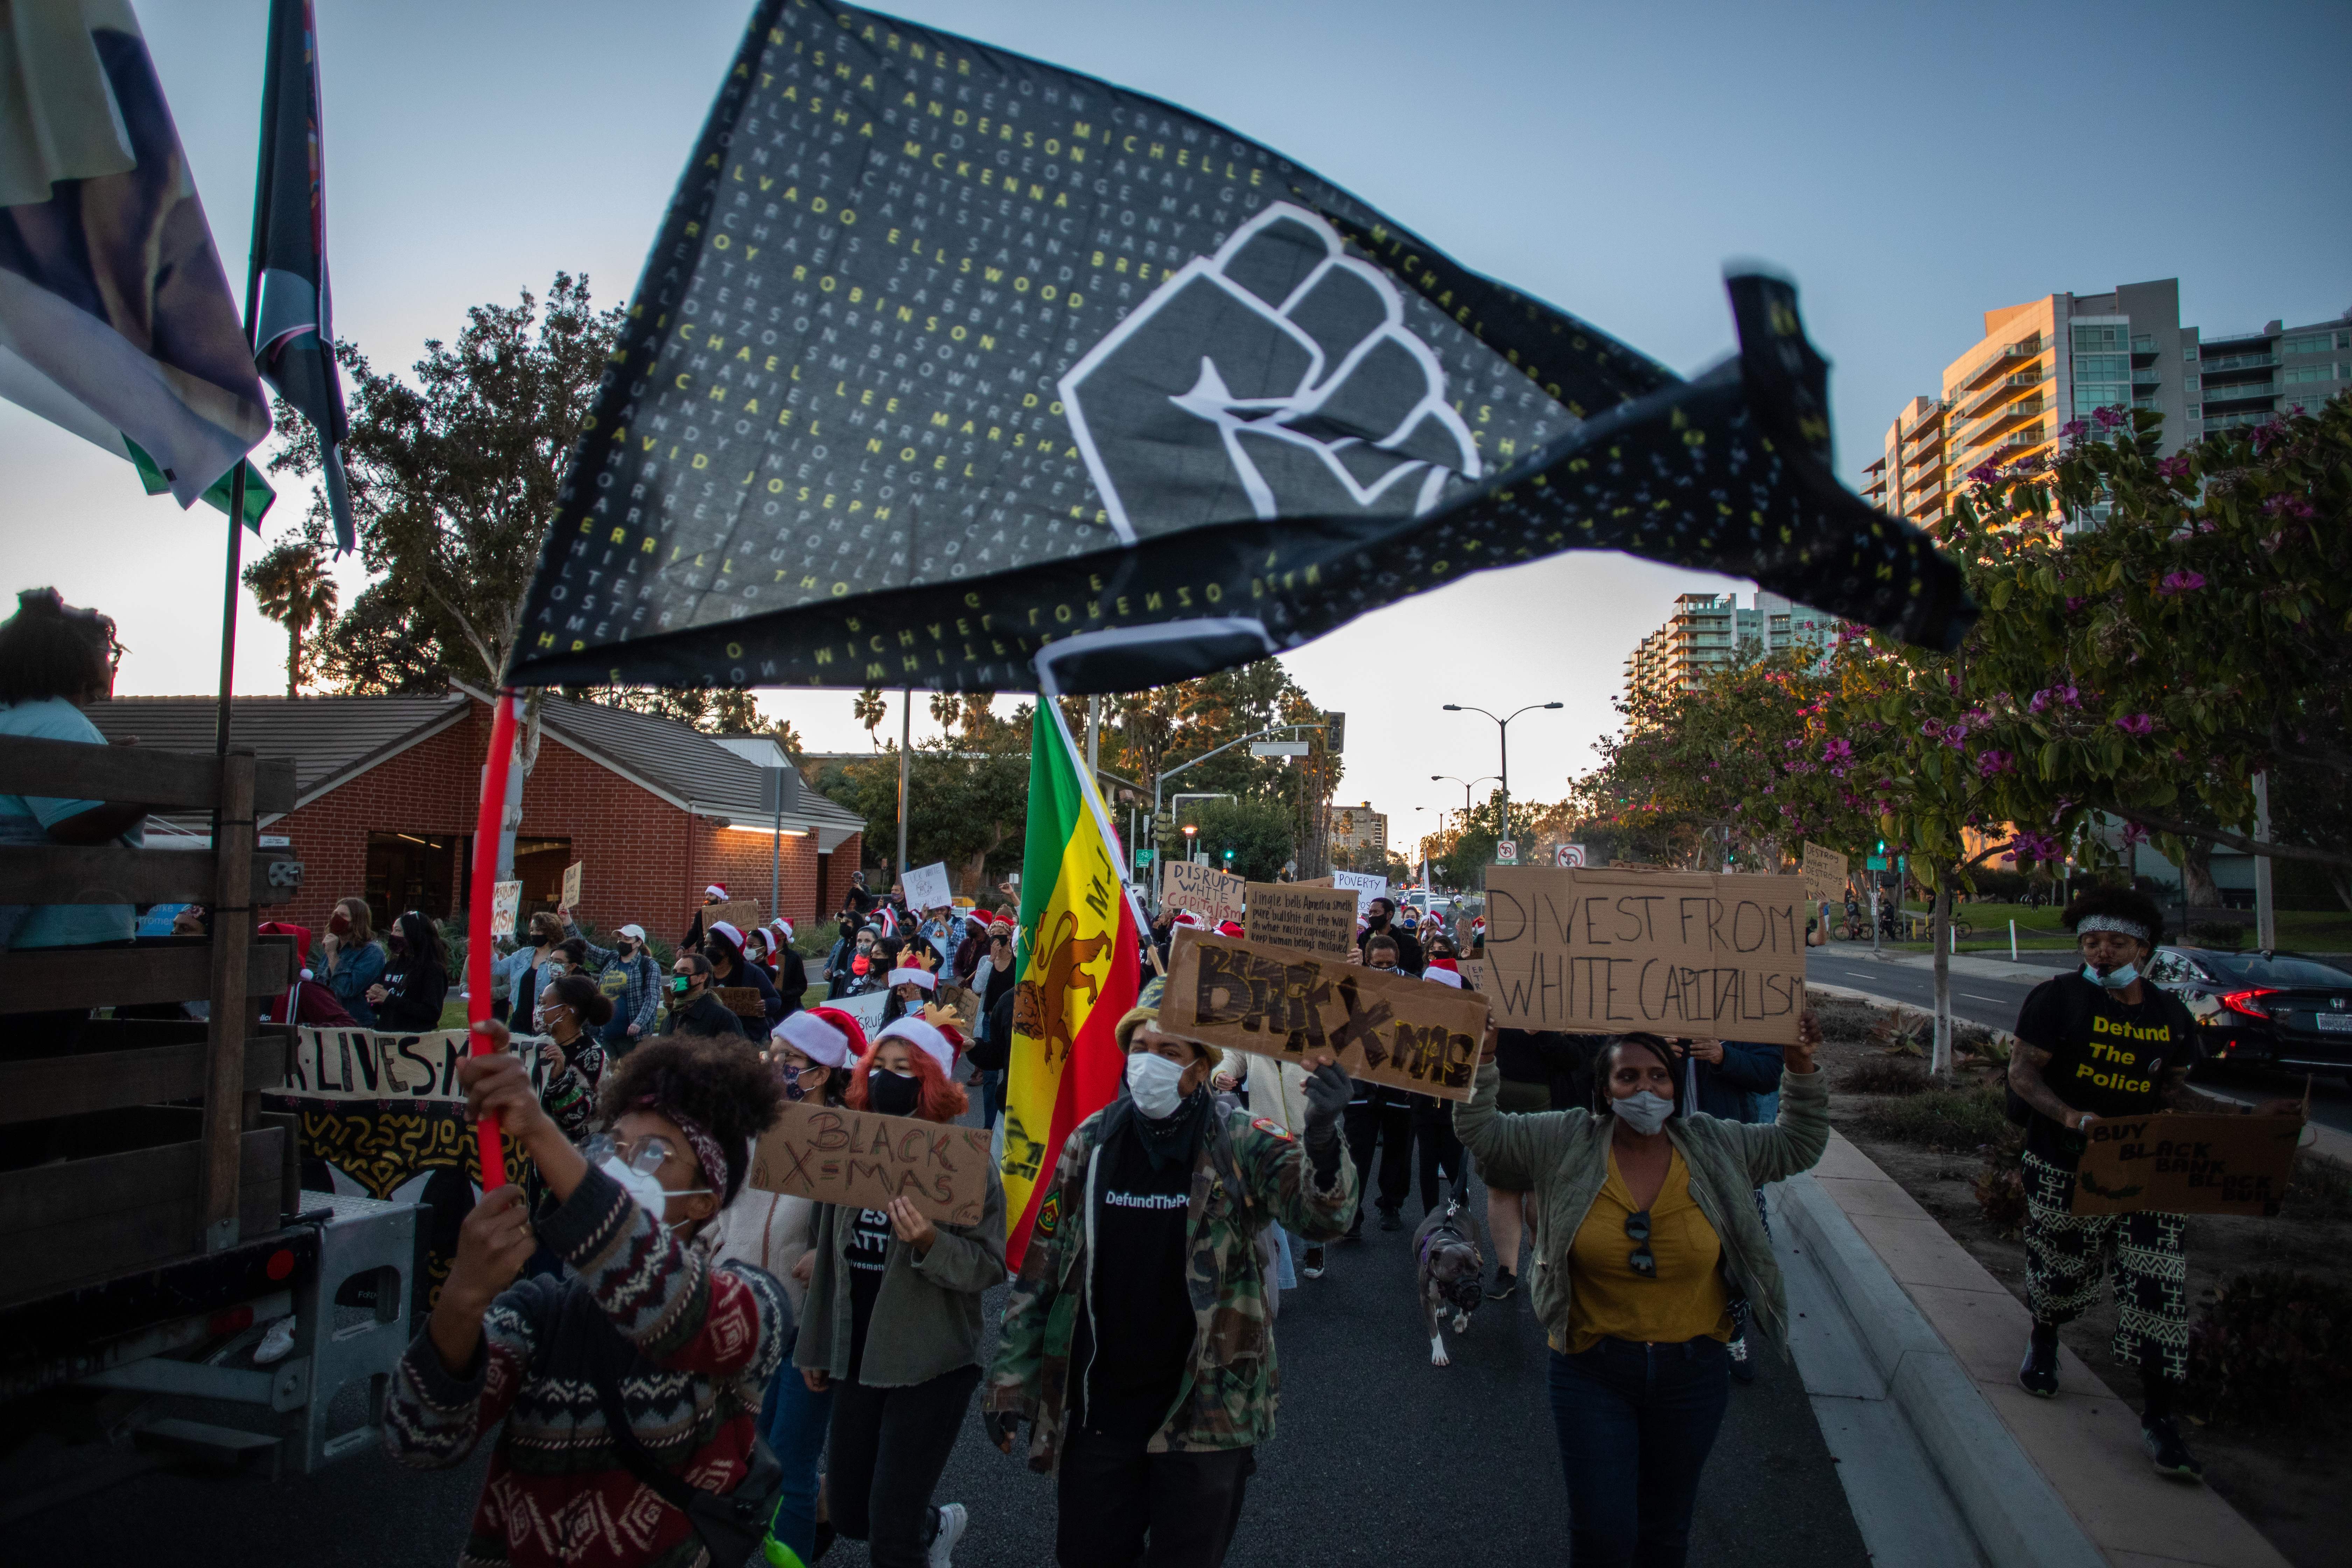 Protesters march through the Marina Del Rey neighbourhood of Los Angeles during a Black Lives Matter rally to demand social justice on December 19, 2020